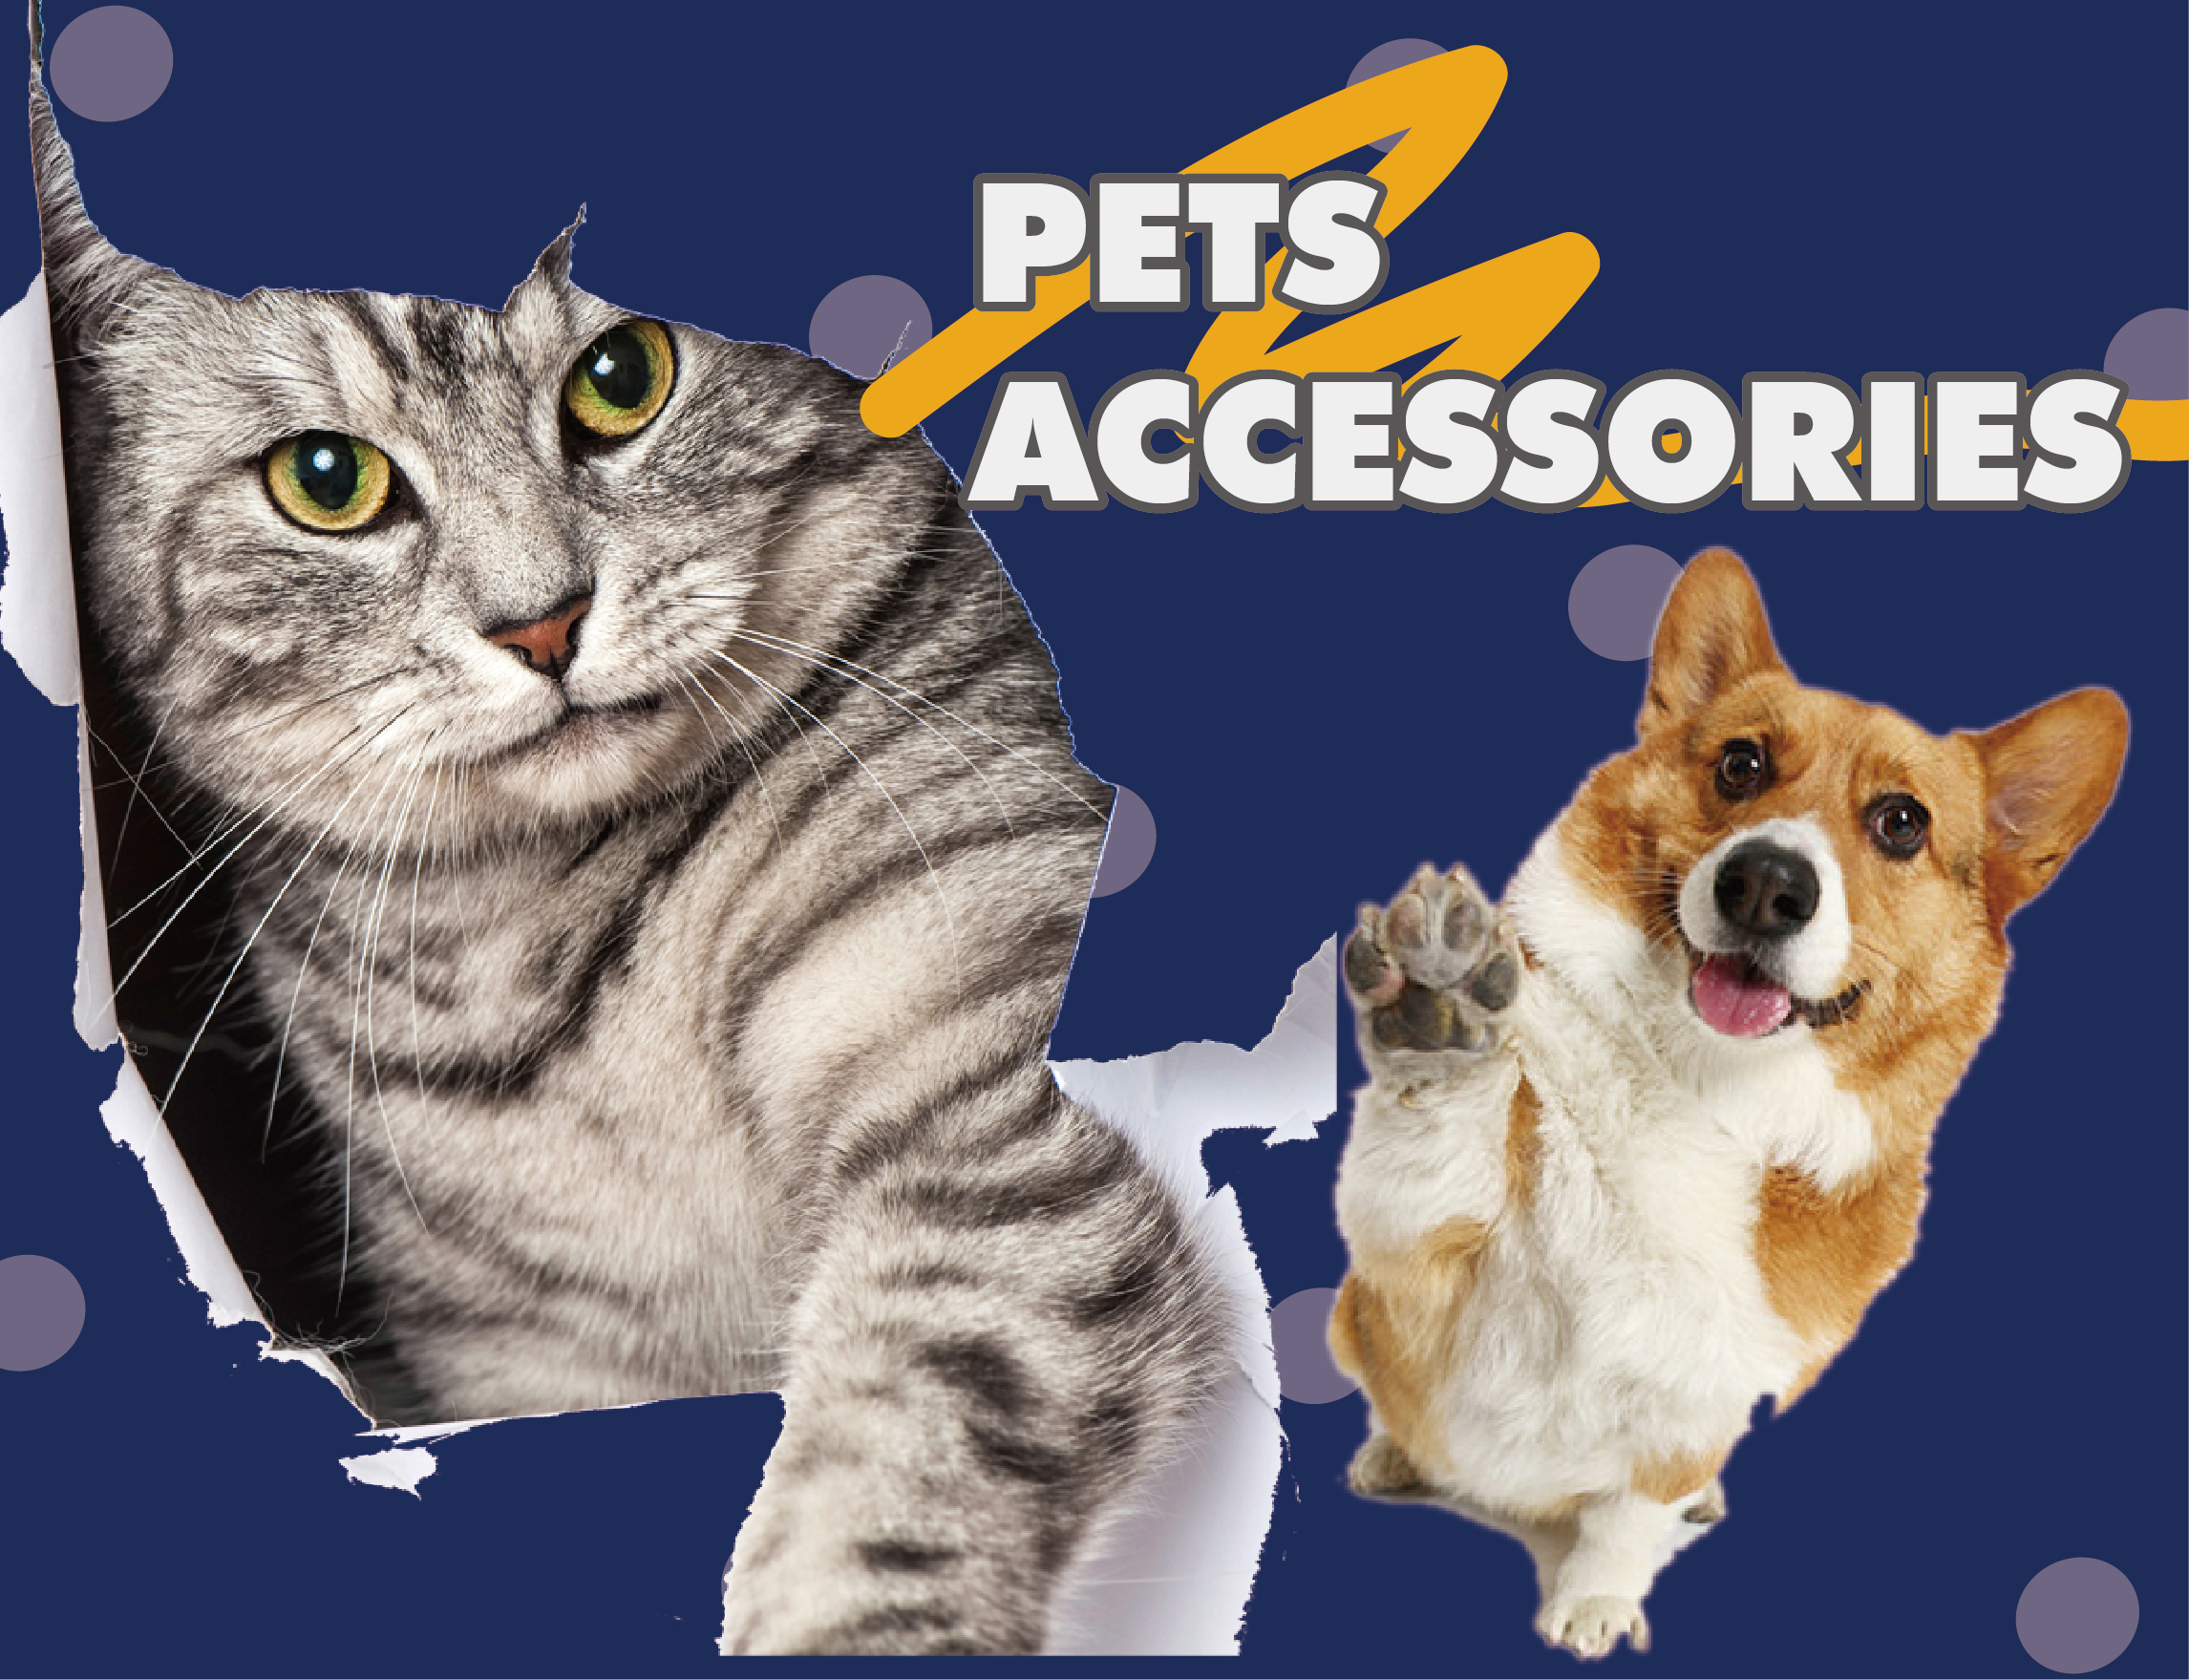 PETS ACCESSORIES